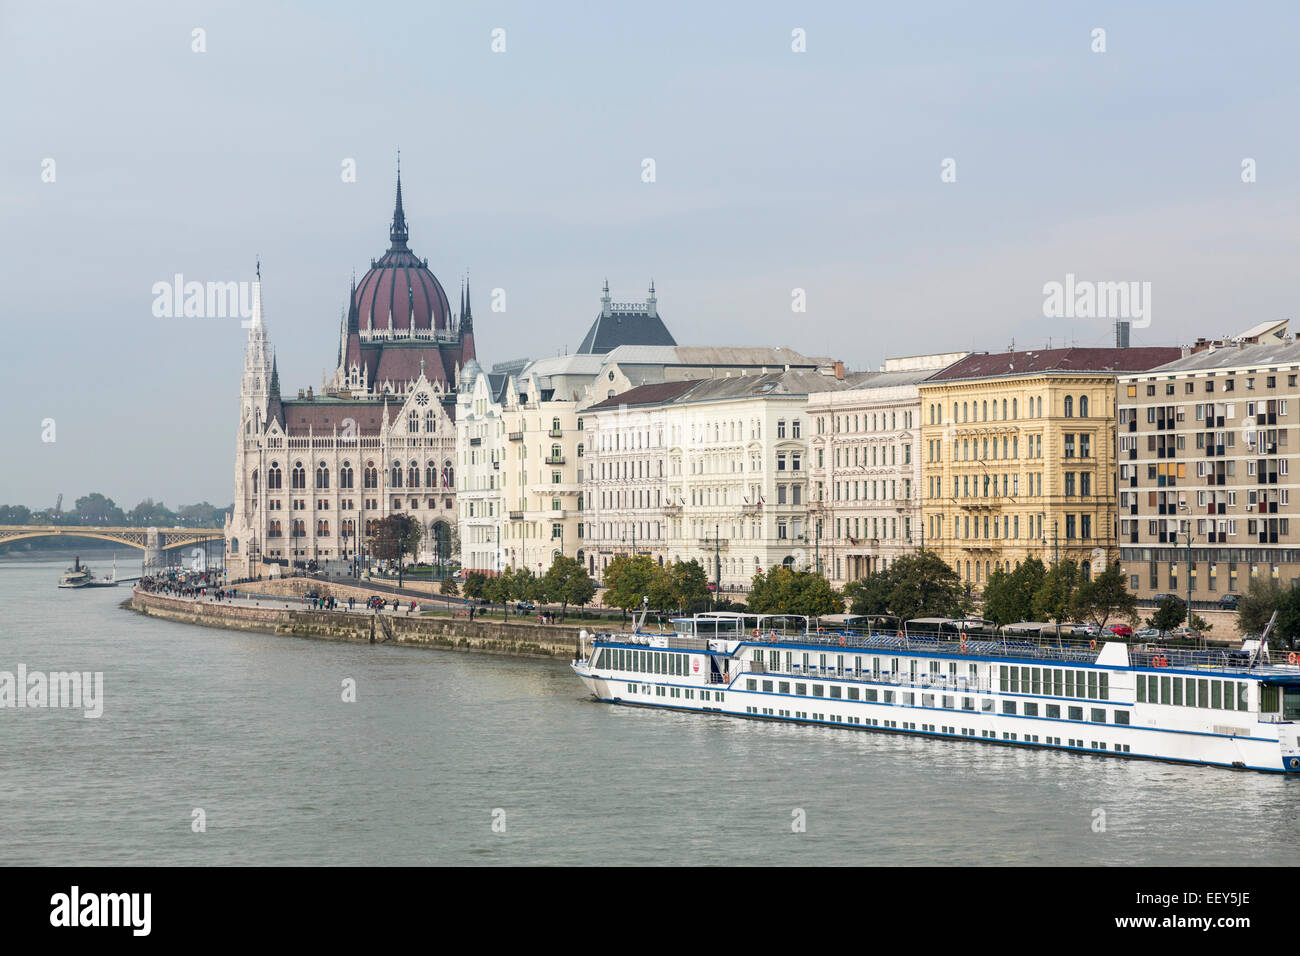 Budapest, Hungary - View of the Hungarian Parliament building in Buda on banks of River Danube Stock Photo